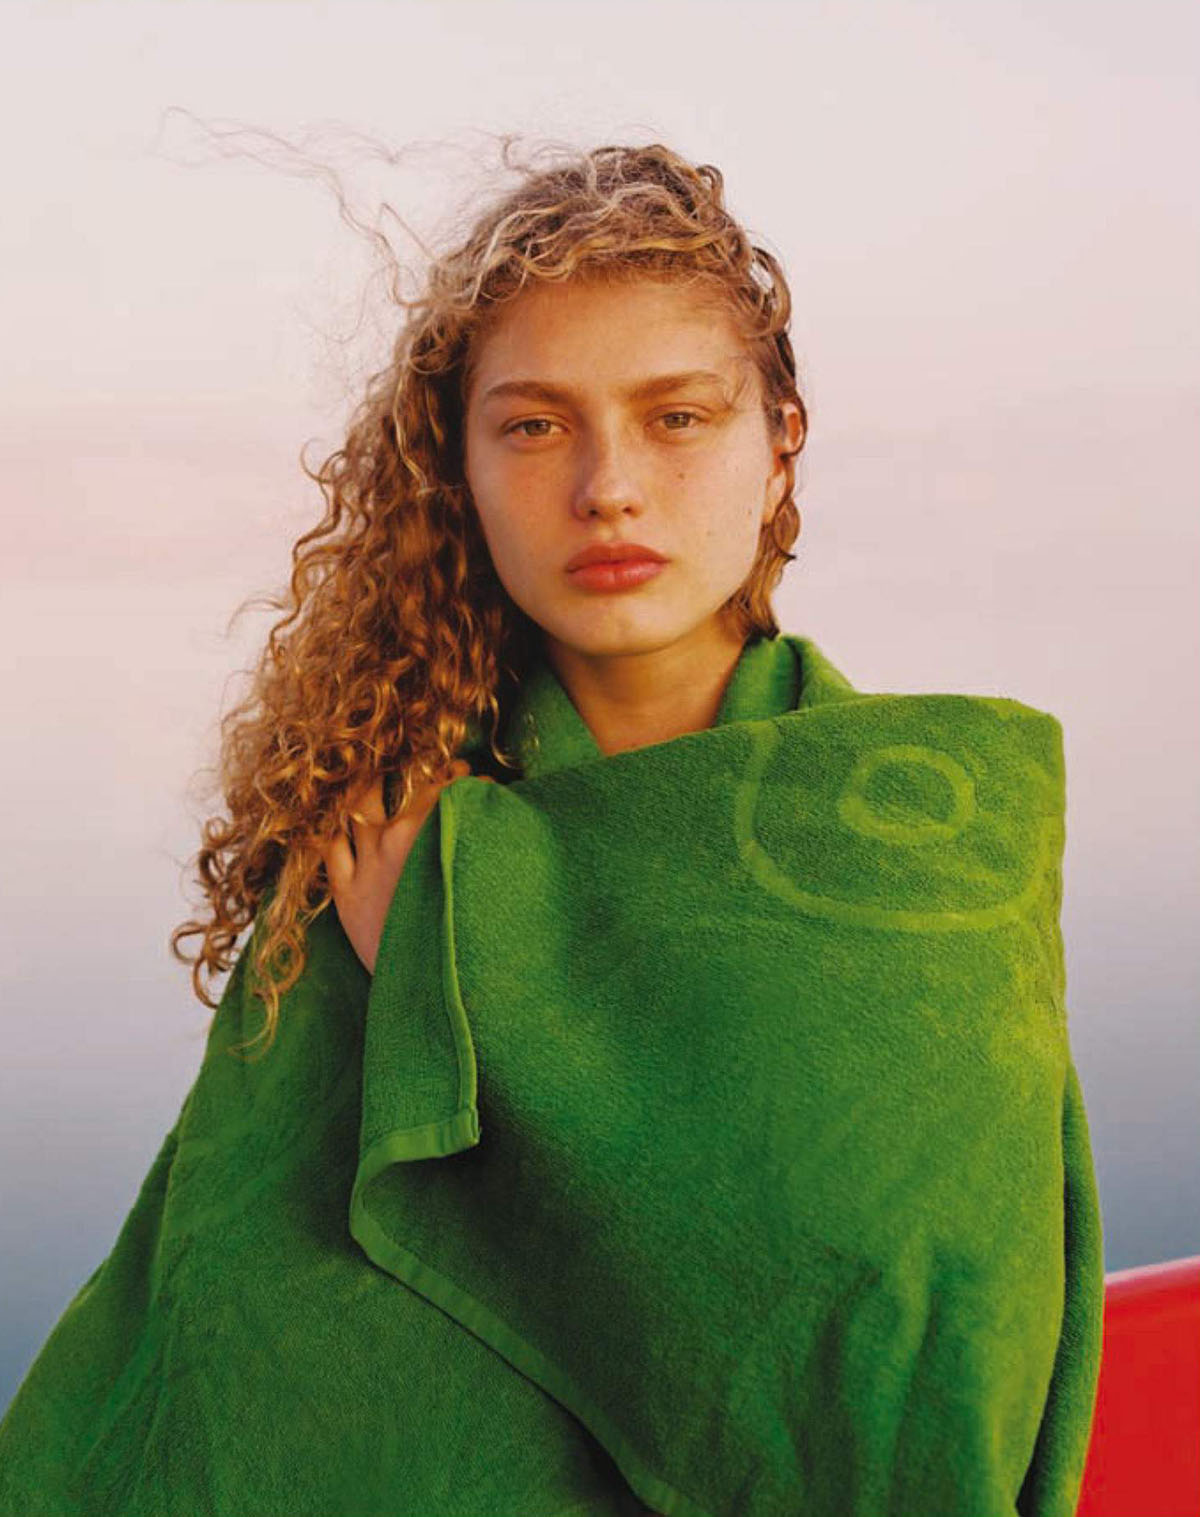 Dorit Revelis by Dudi Hasson for Vogue China June 2021